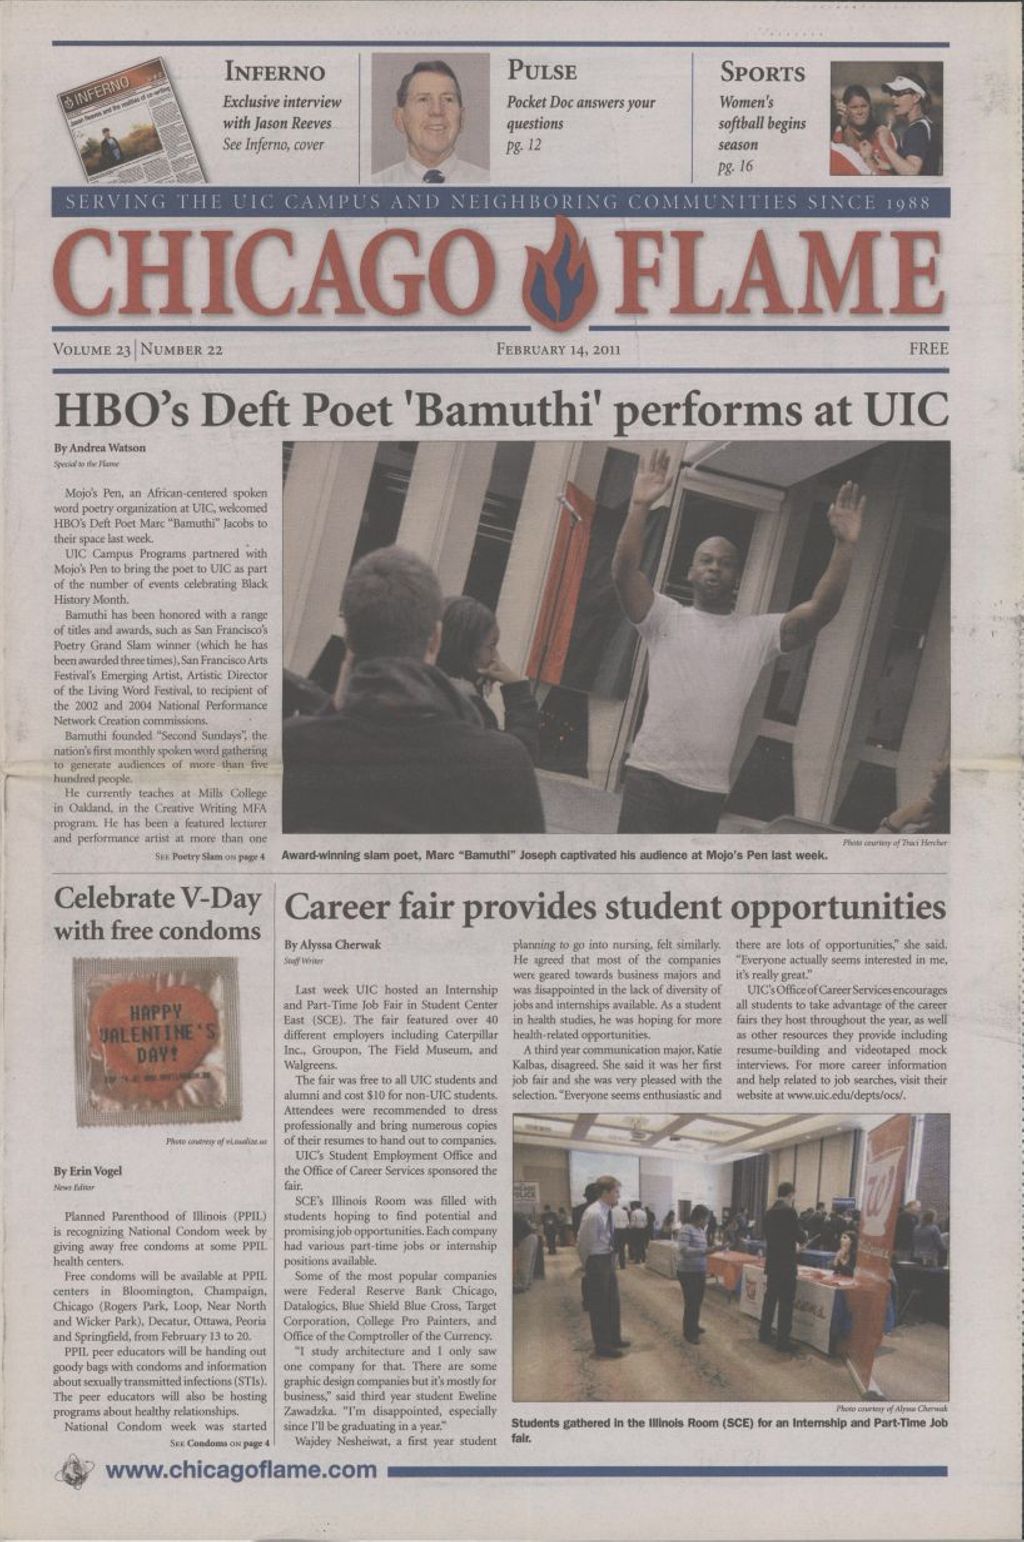 Chicago Flame (February 14, 2011)